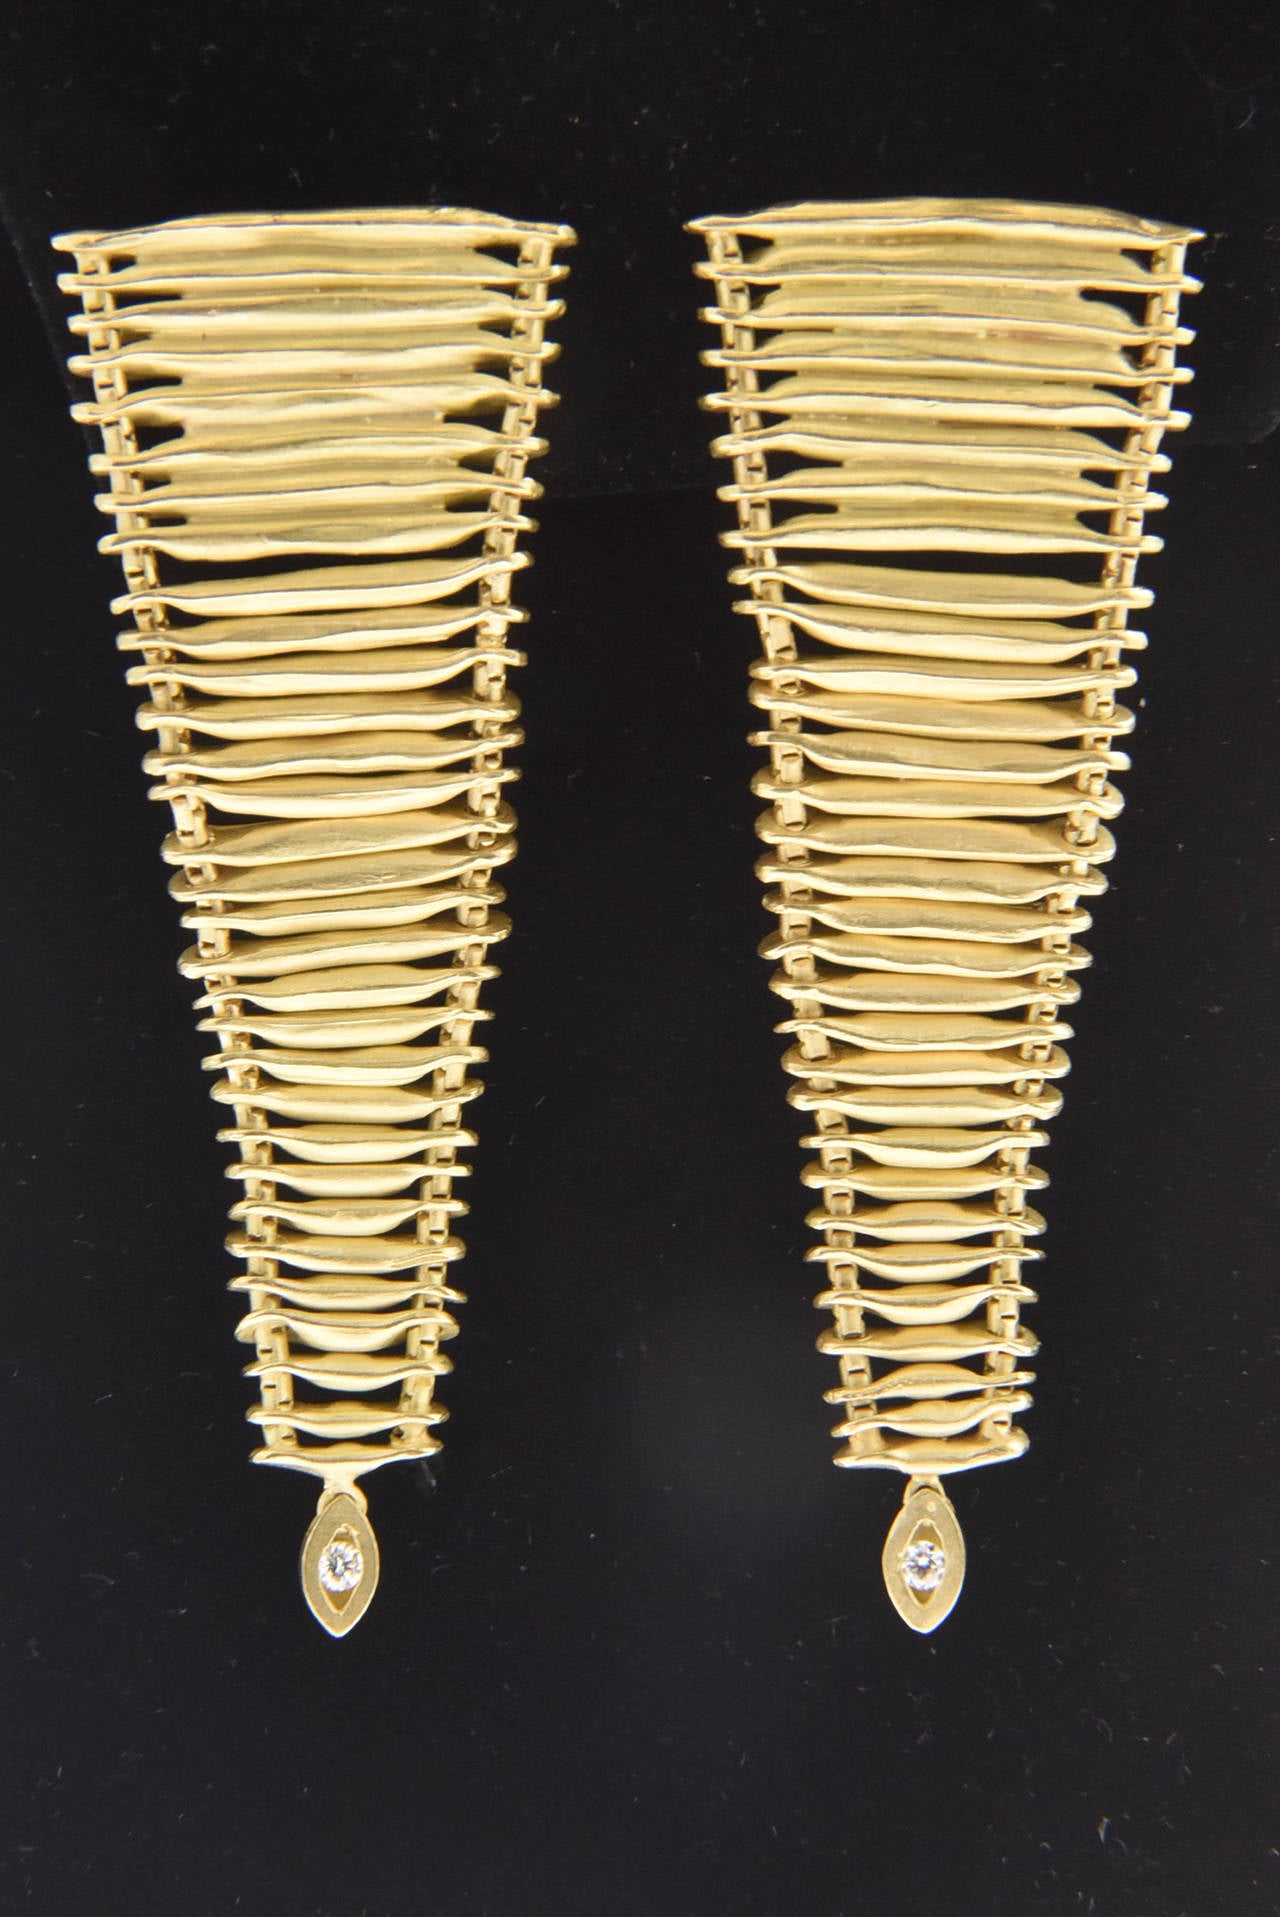 Beautifully handcrafted graduating free-form gold bars with diamond within diamond dangle part of the kH Stern Coleção Indiado Collection. Made of 18 karat yellow gold. 